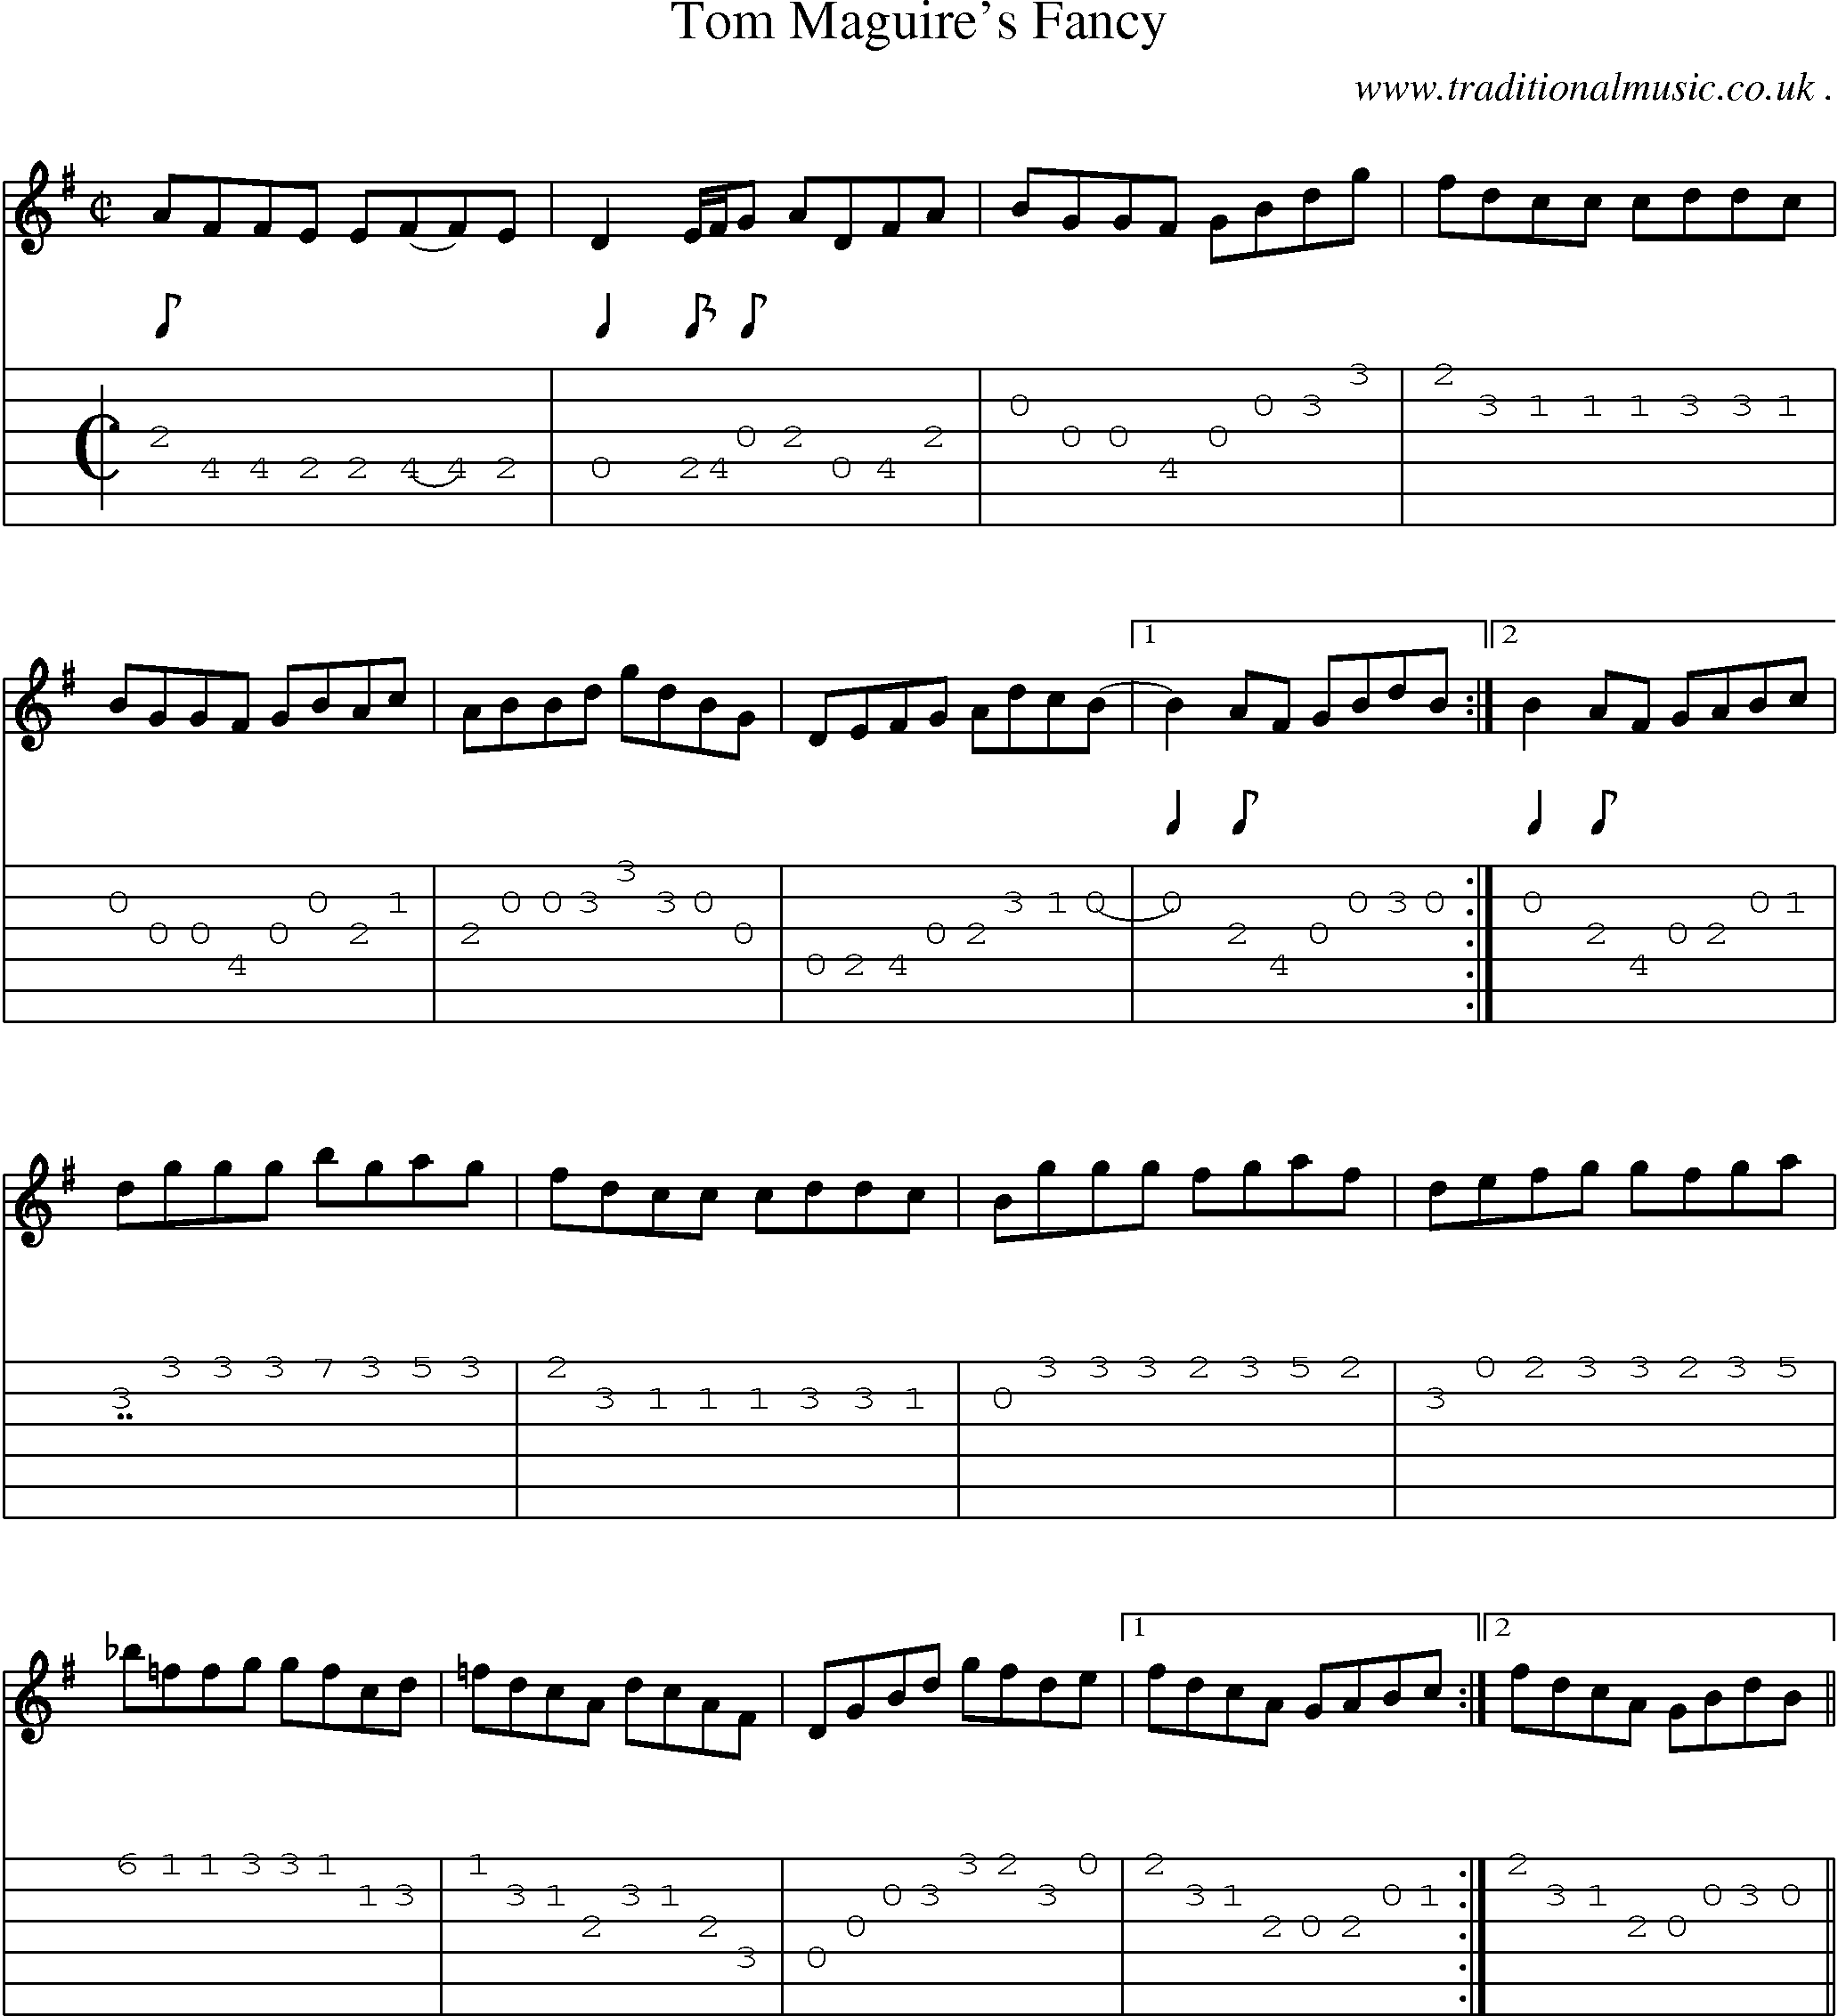 Sheet-Music and Guitar Tabs for Tom Maguires Fancy